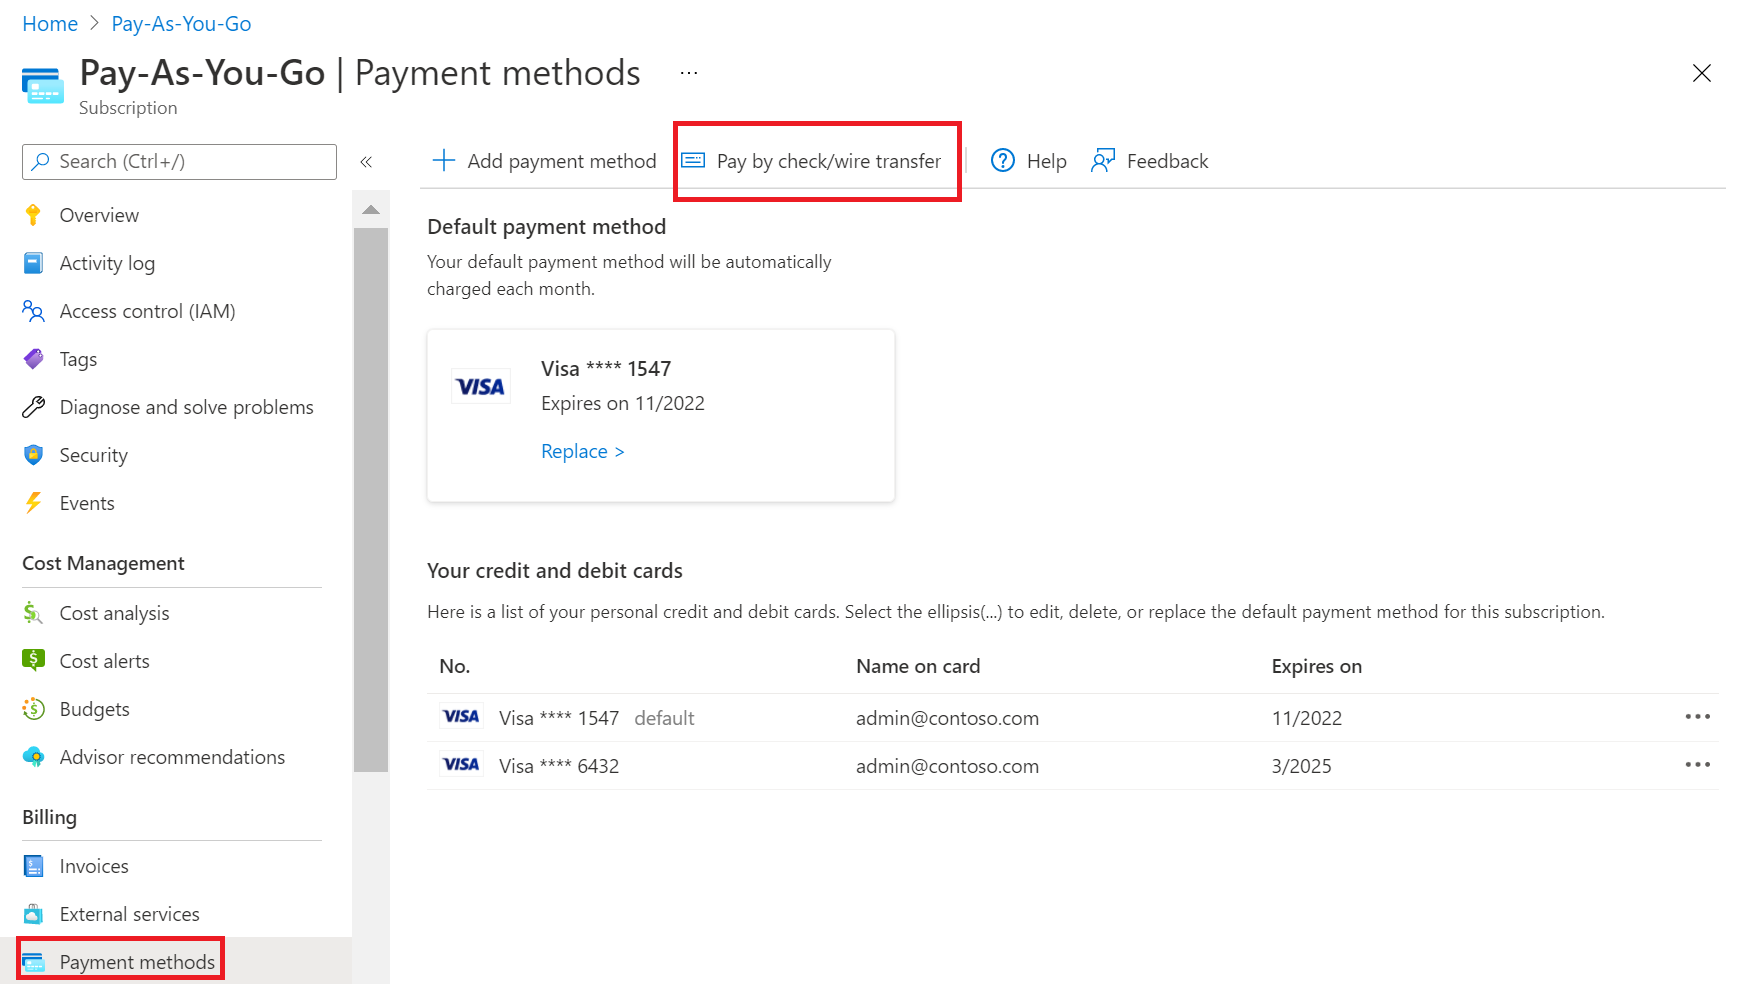 Screenshot showing the Pay by check/wire transfer option.